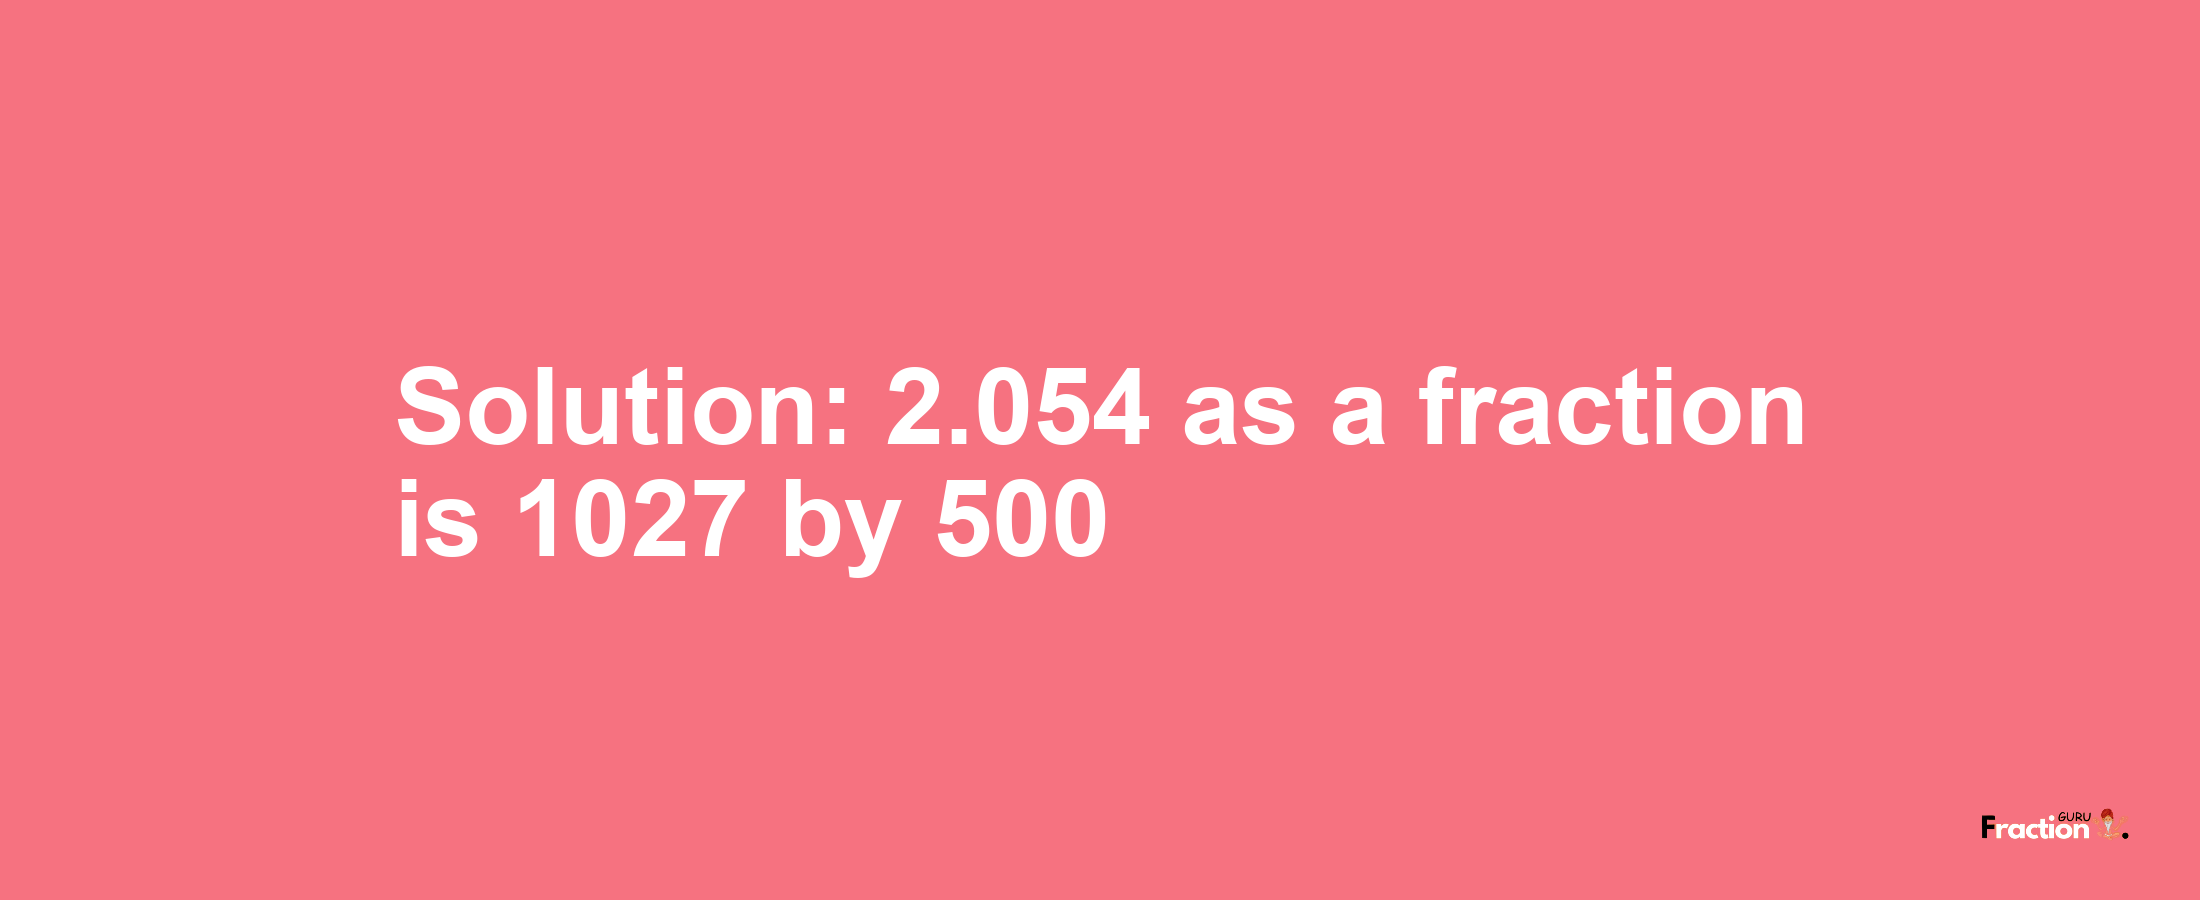 Solution:2.054 as a fraction is 1027/500